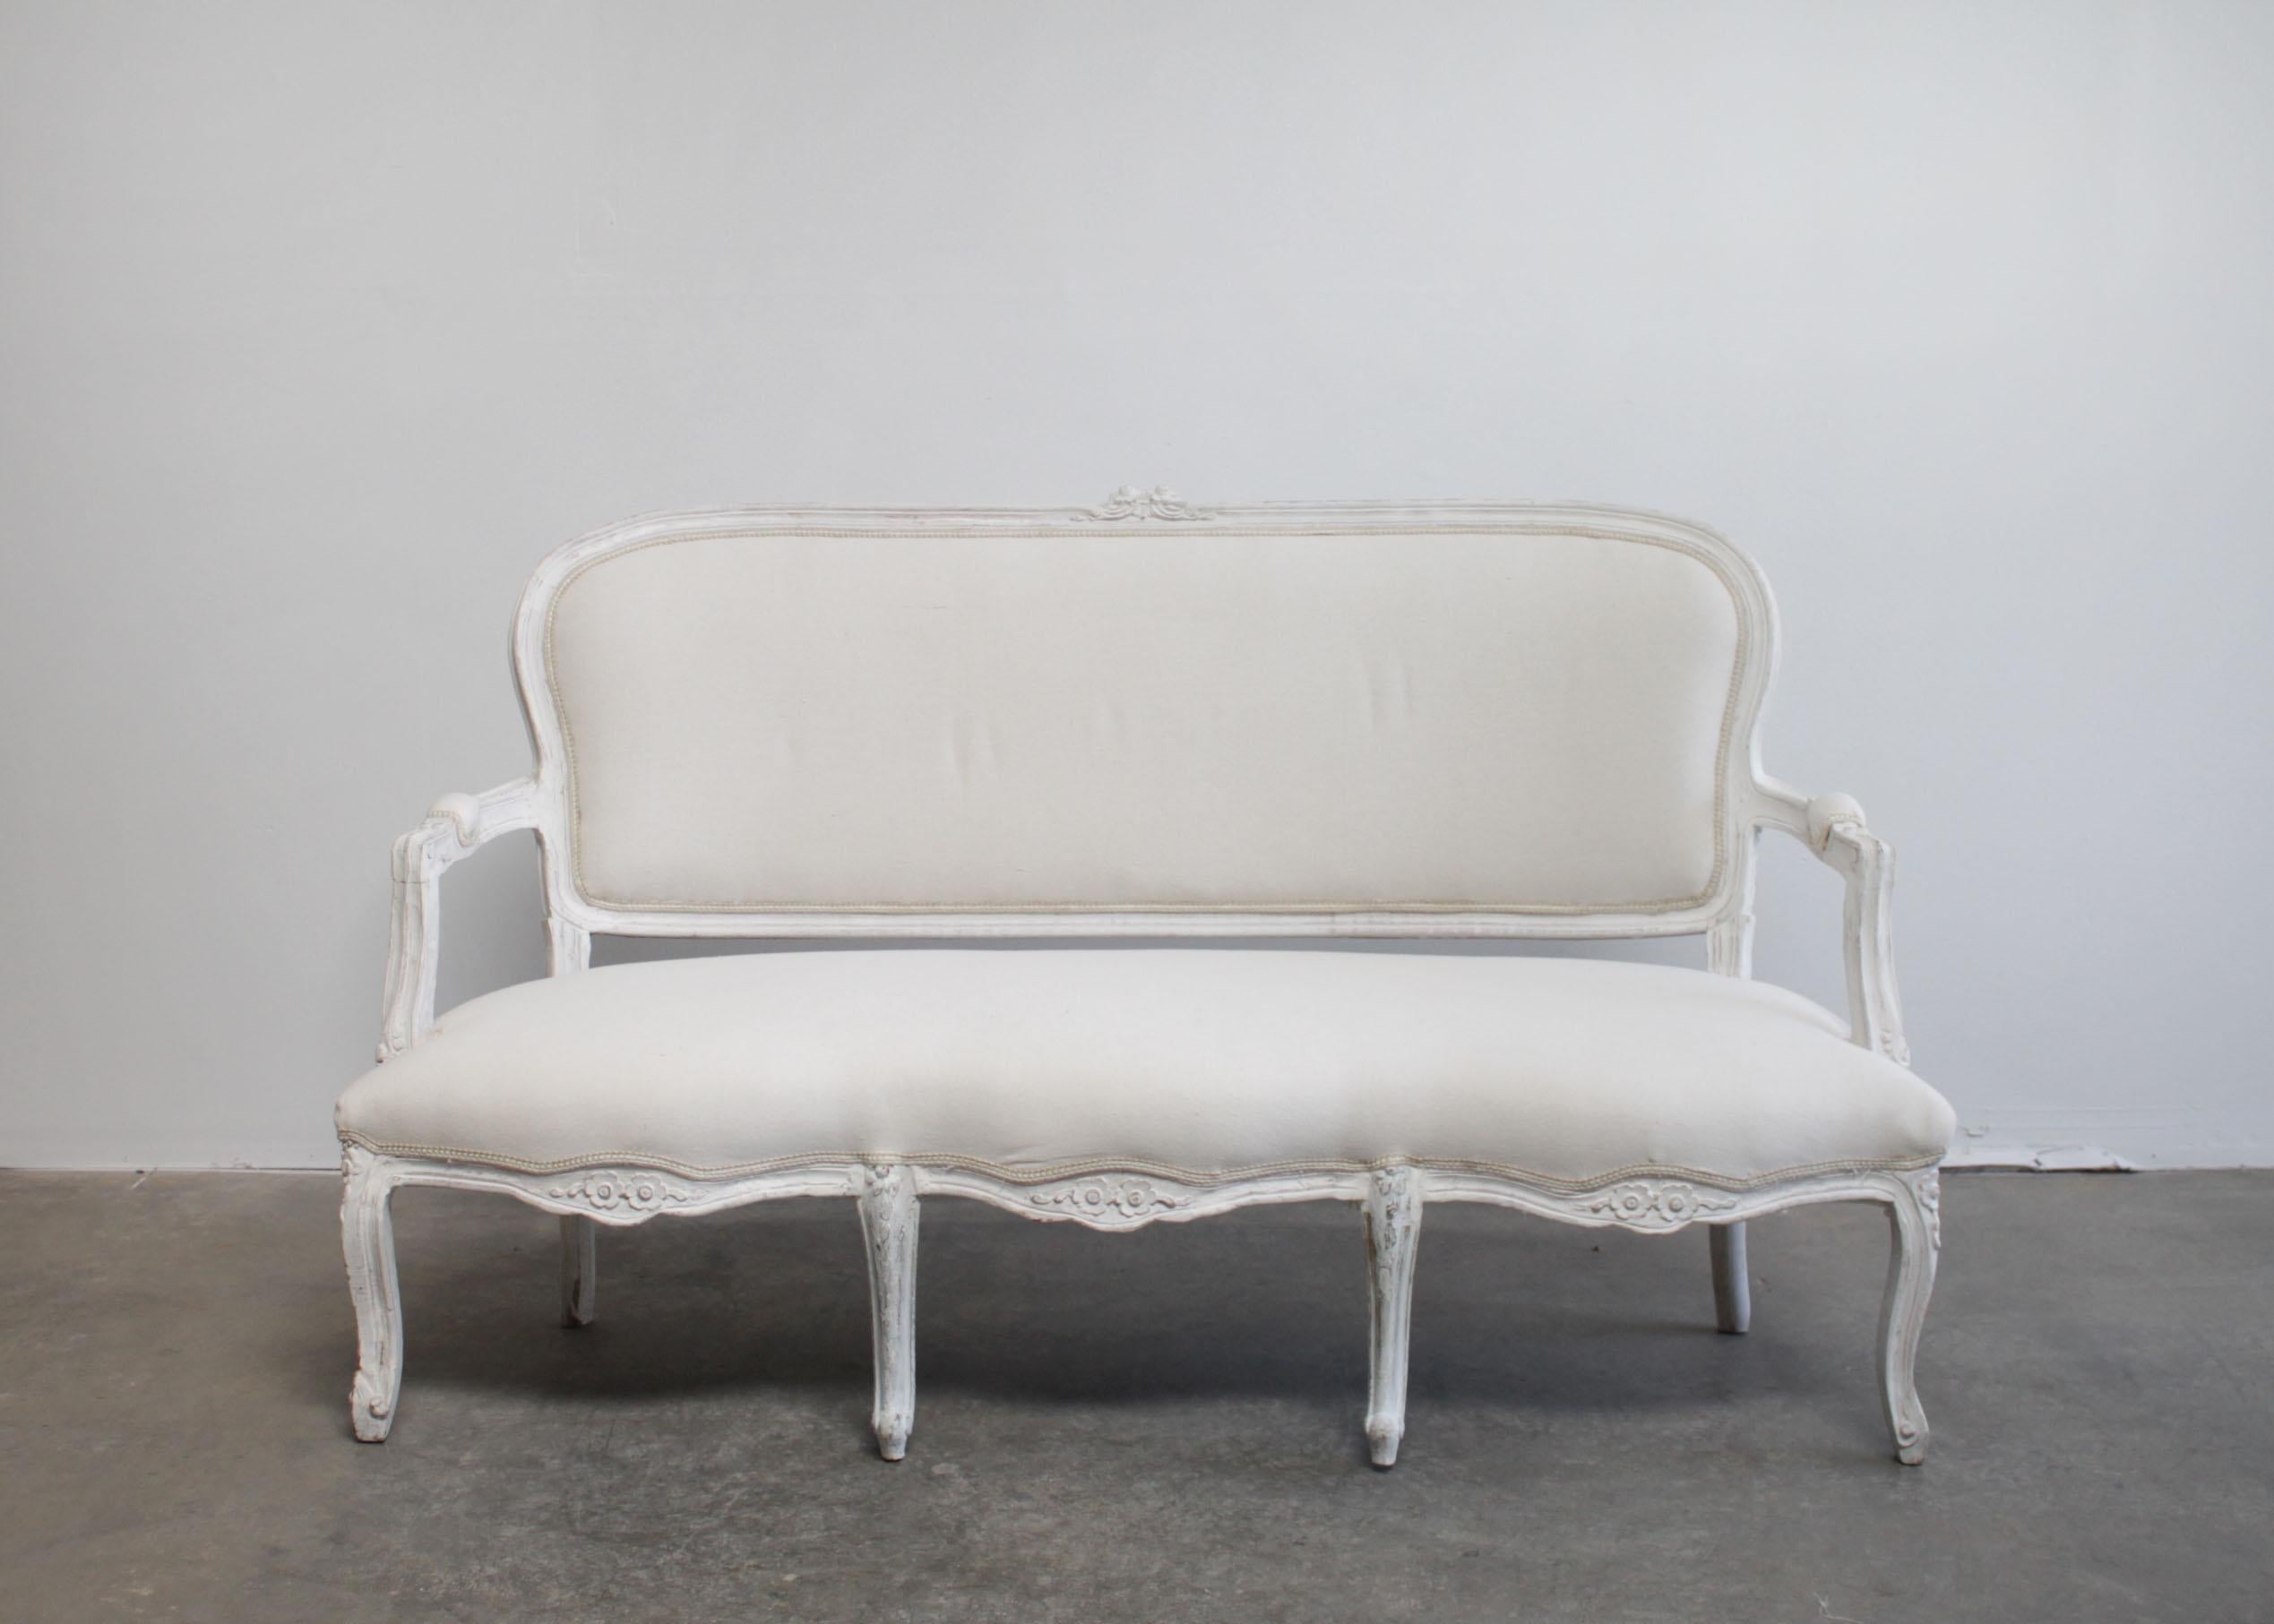 Vintage painted and upholstered Louis XV style open arm sofa settee
Painted in a French white with subtle distressed edges.
Classic cabriole legs, with a floral carvings, and double flower carvings at the top back of the settee.
Upholstered in a